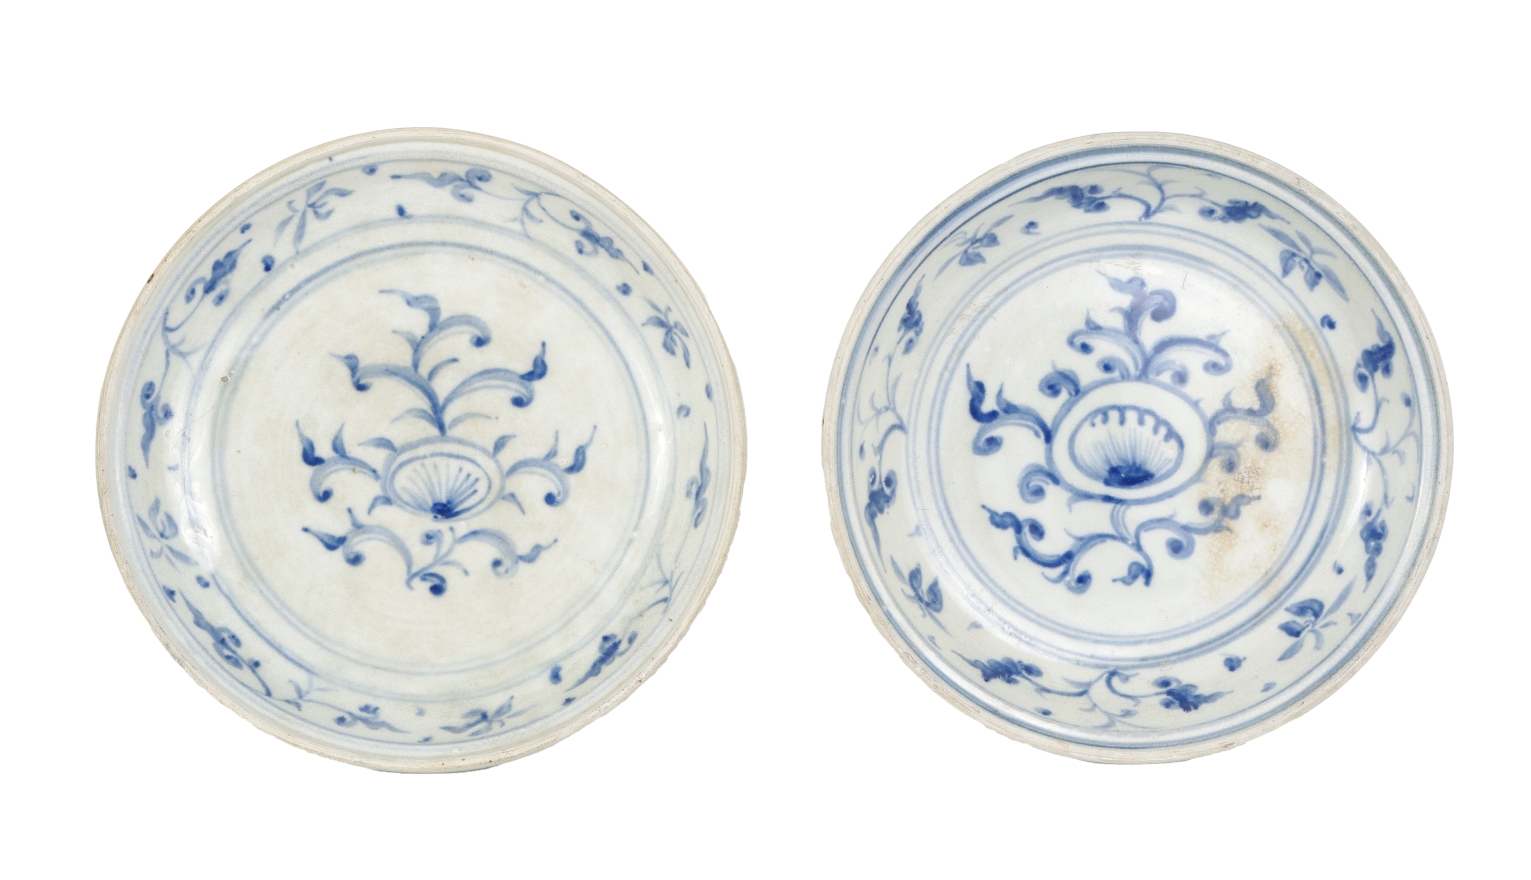 Two Blue and White Serving Dishes from the Hoi An Hoard, c. 1500